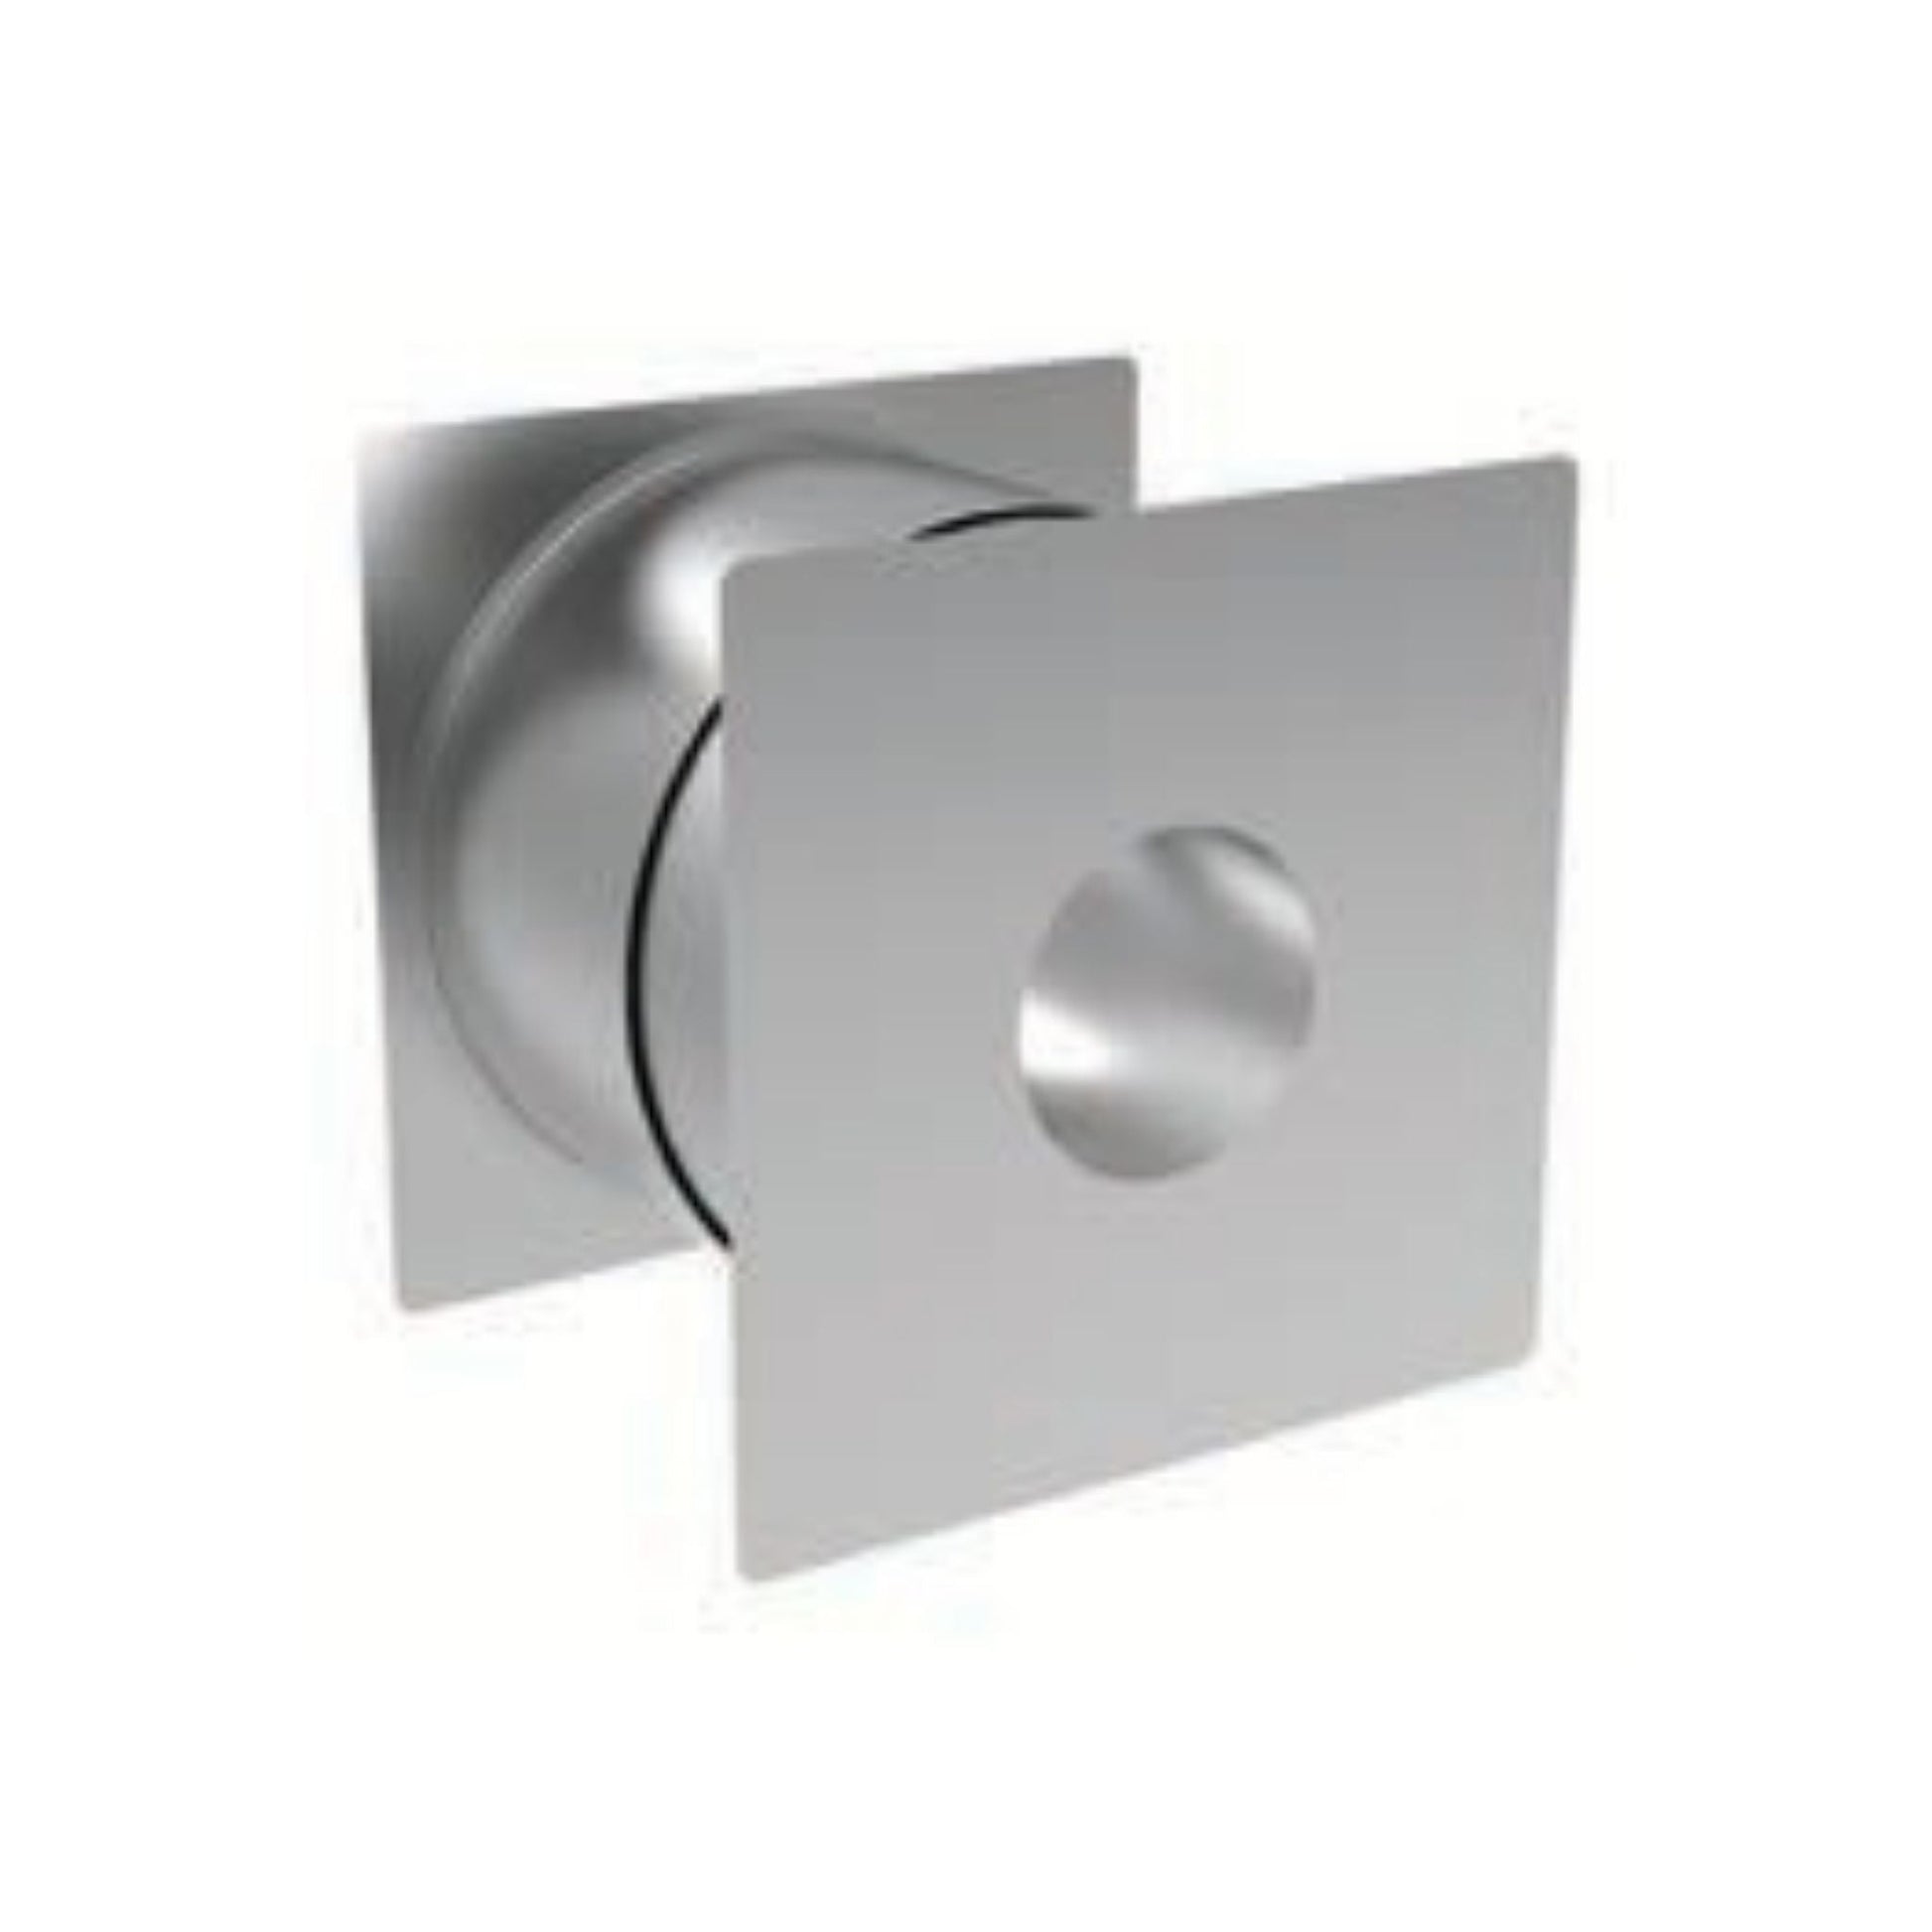 DuraVent FasNSeal 9" 29-4C Stainless Steel Insulated Wall Pass Through